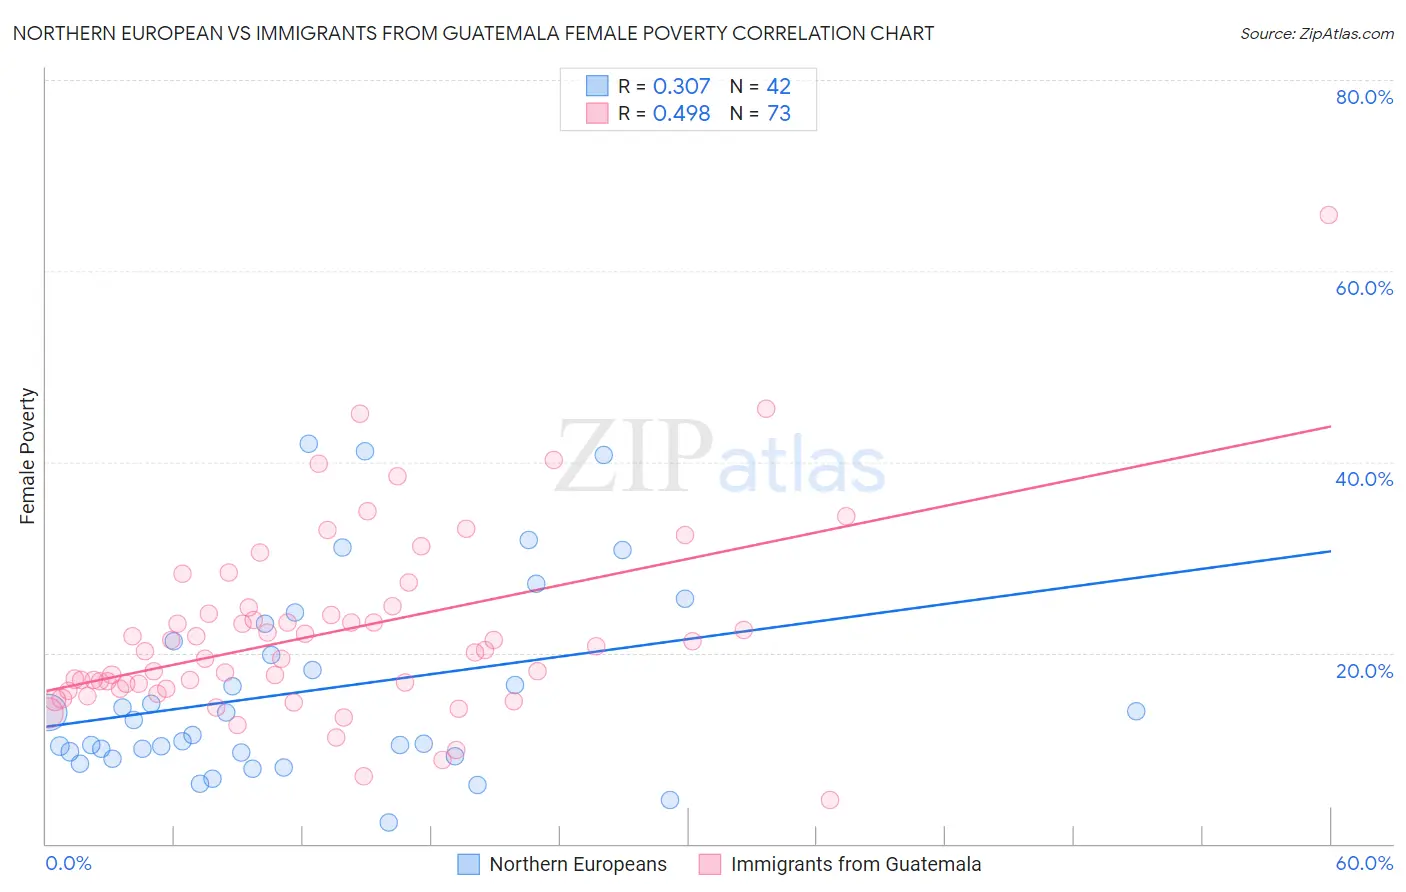 Northern European vs Immigrants from Guatemala Female Poverty